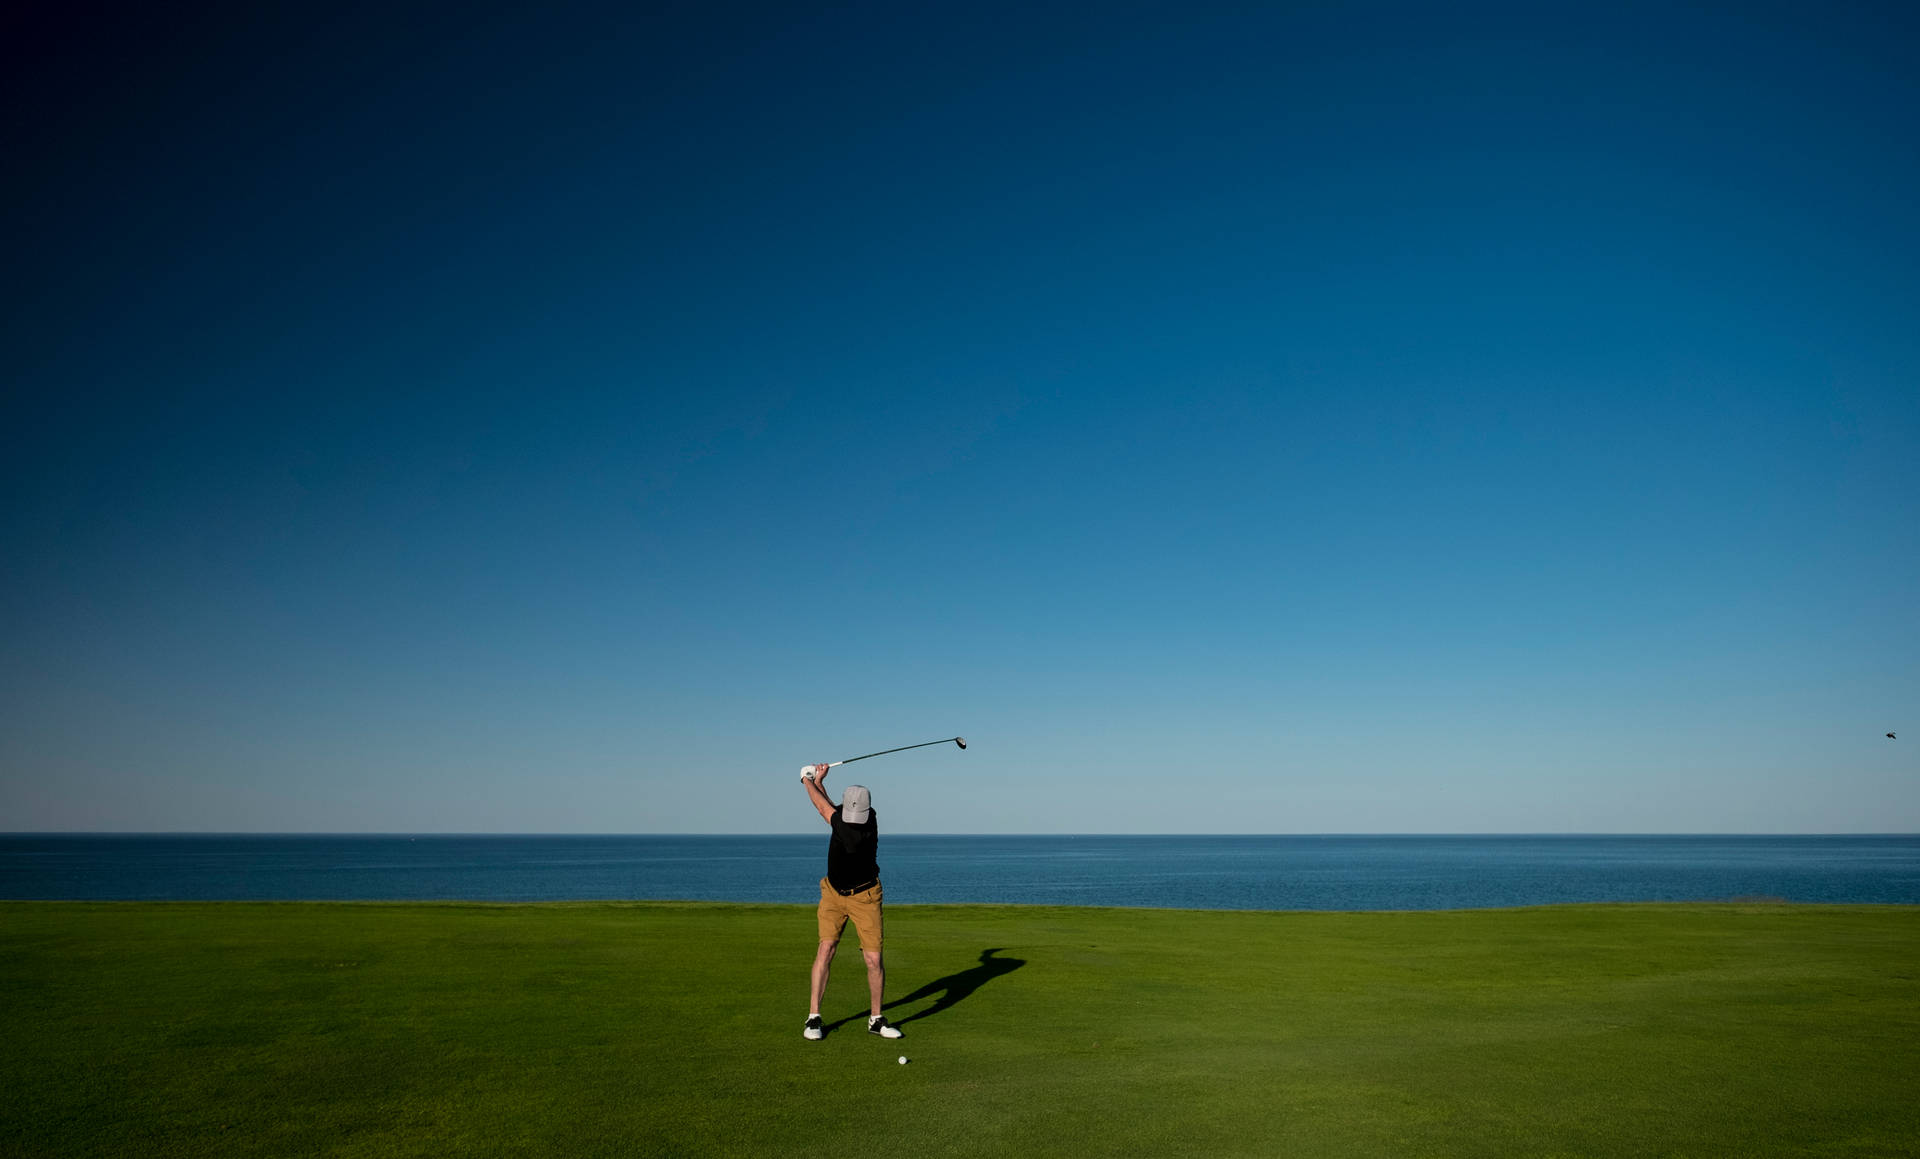 Man Swinging On Golf Course By Sea Background